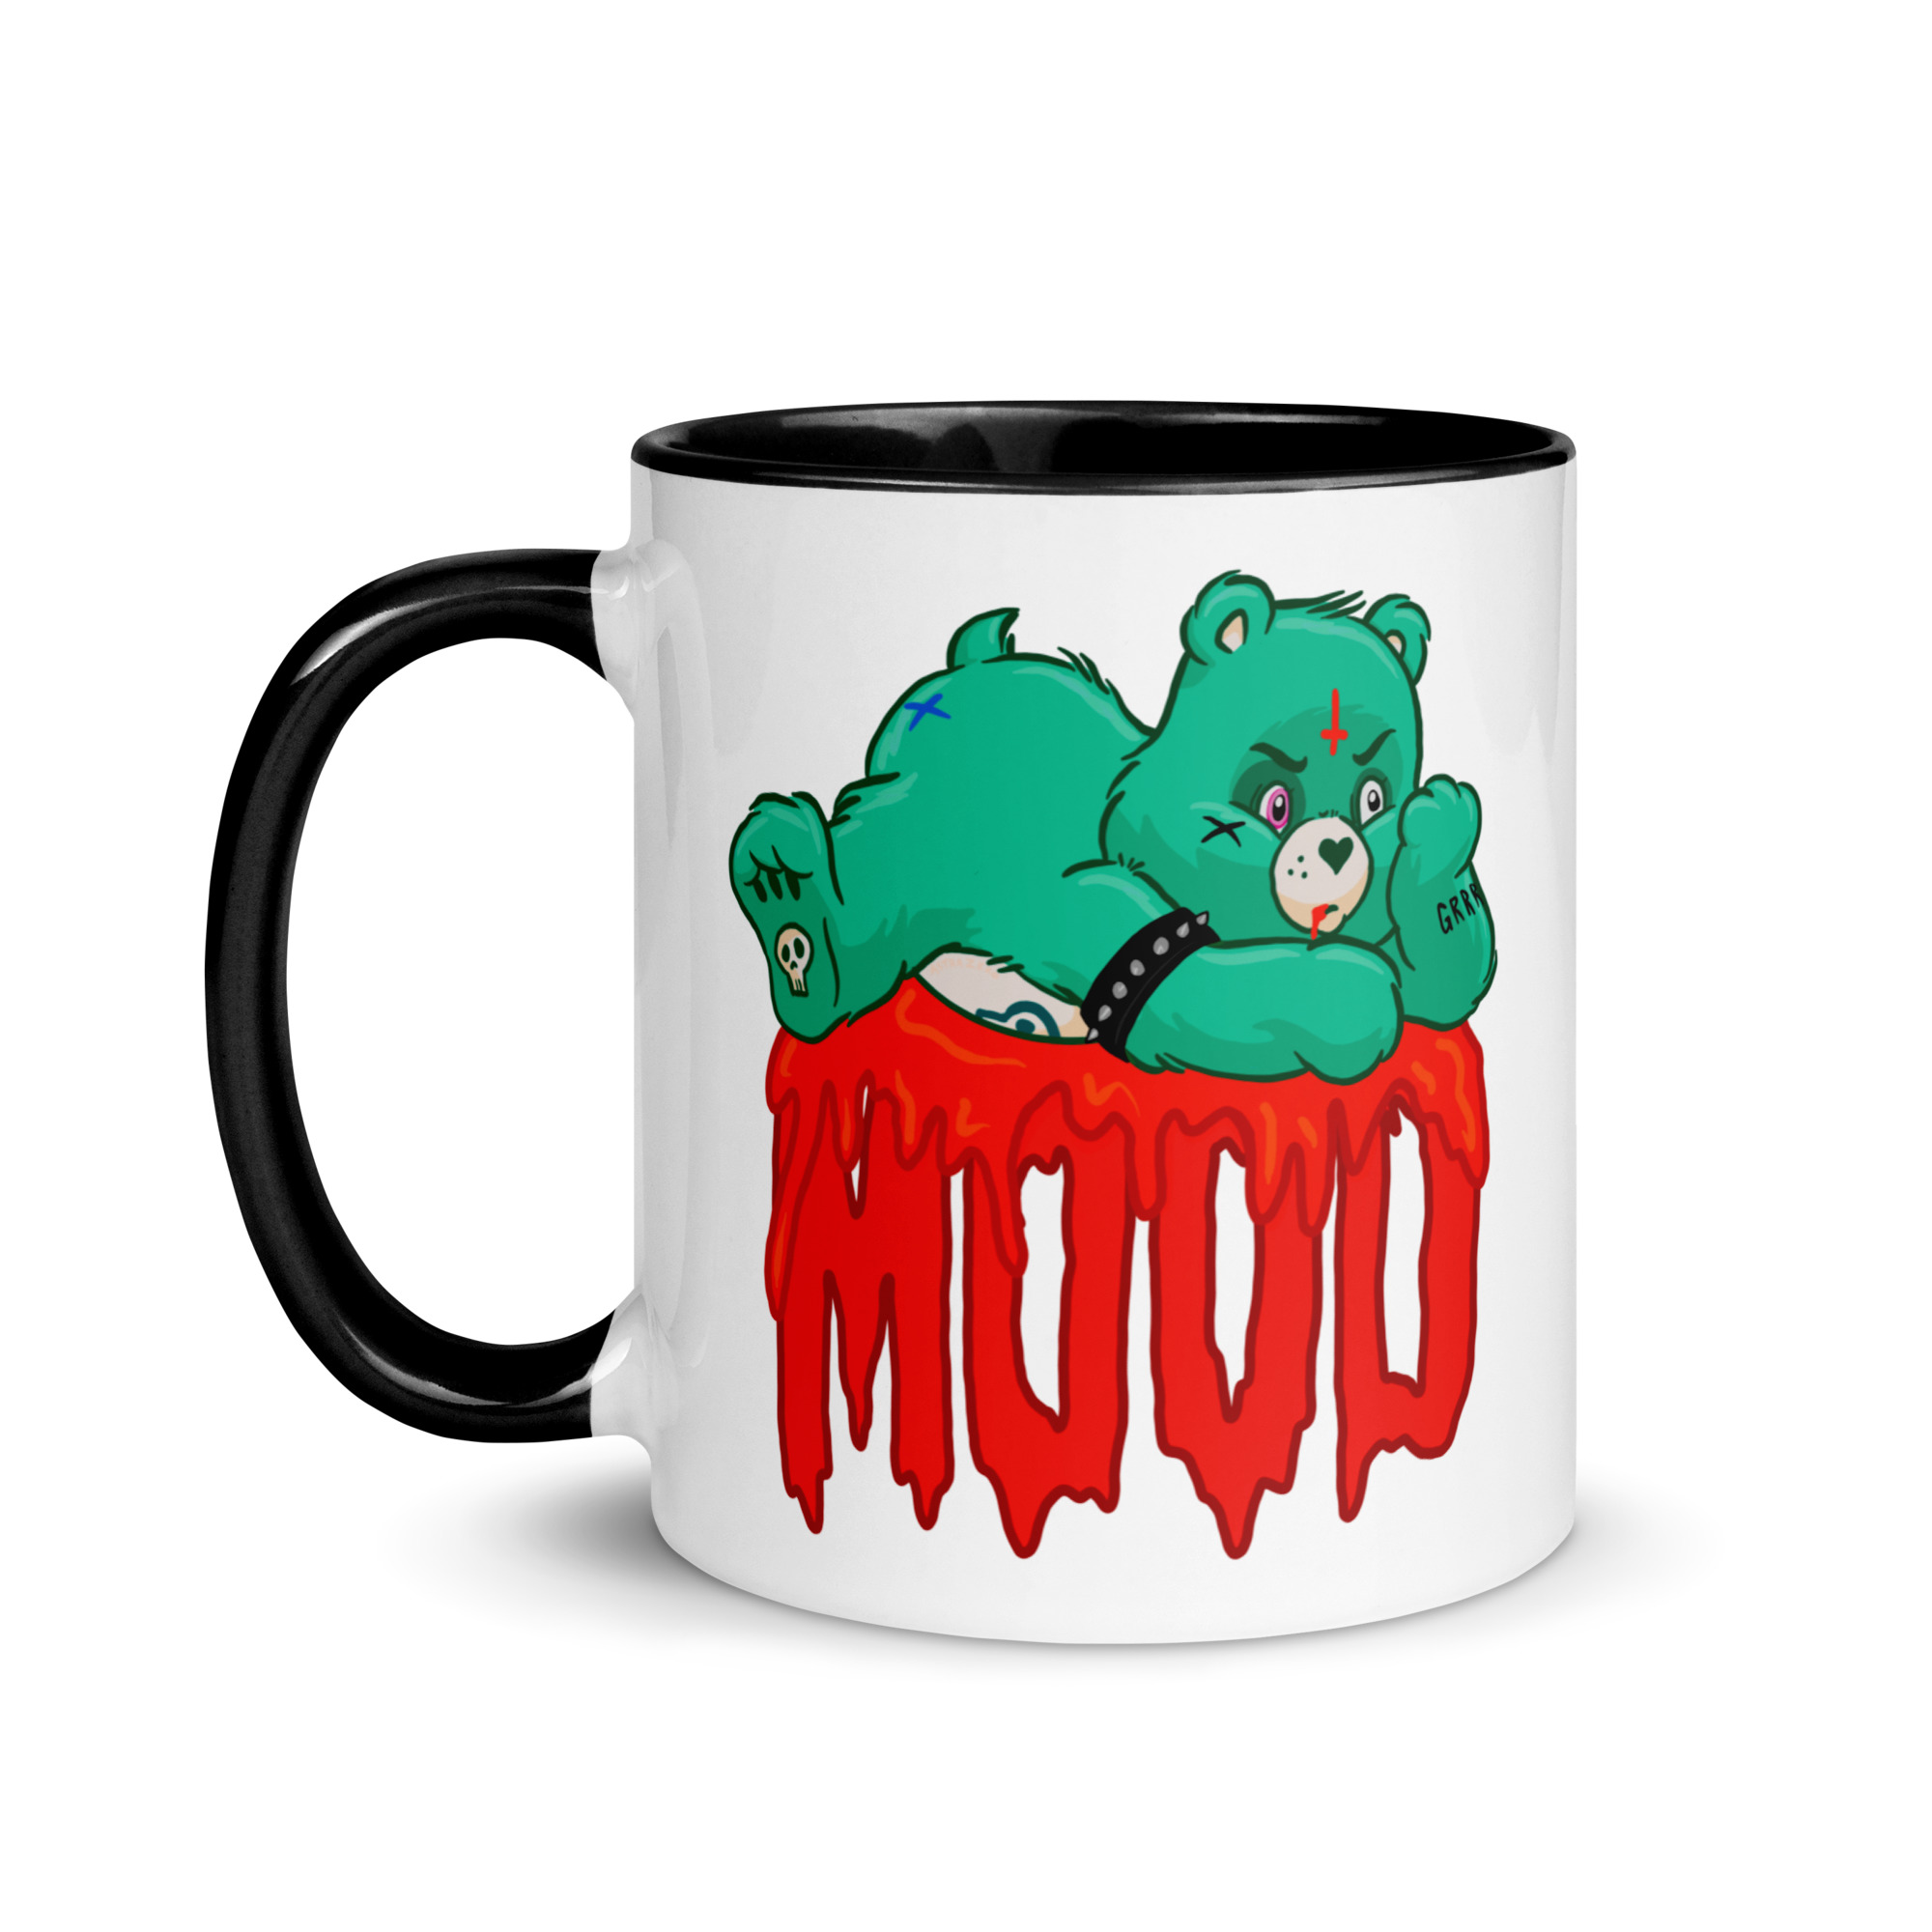 Featured image for “MOOD - Mug with Color Inside”